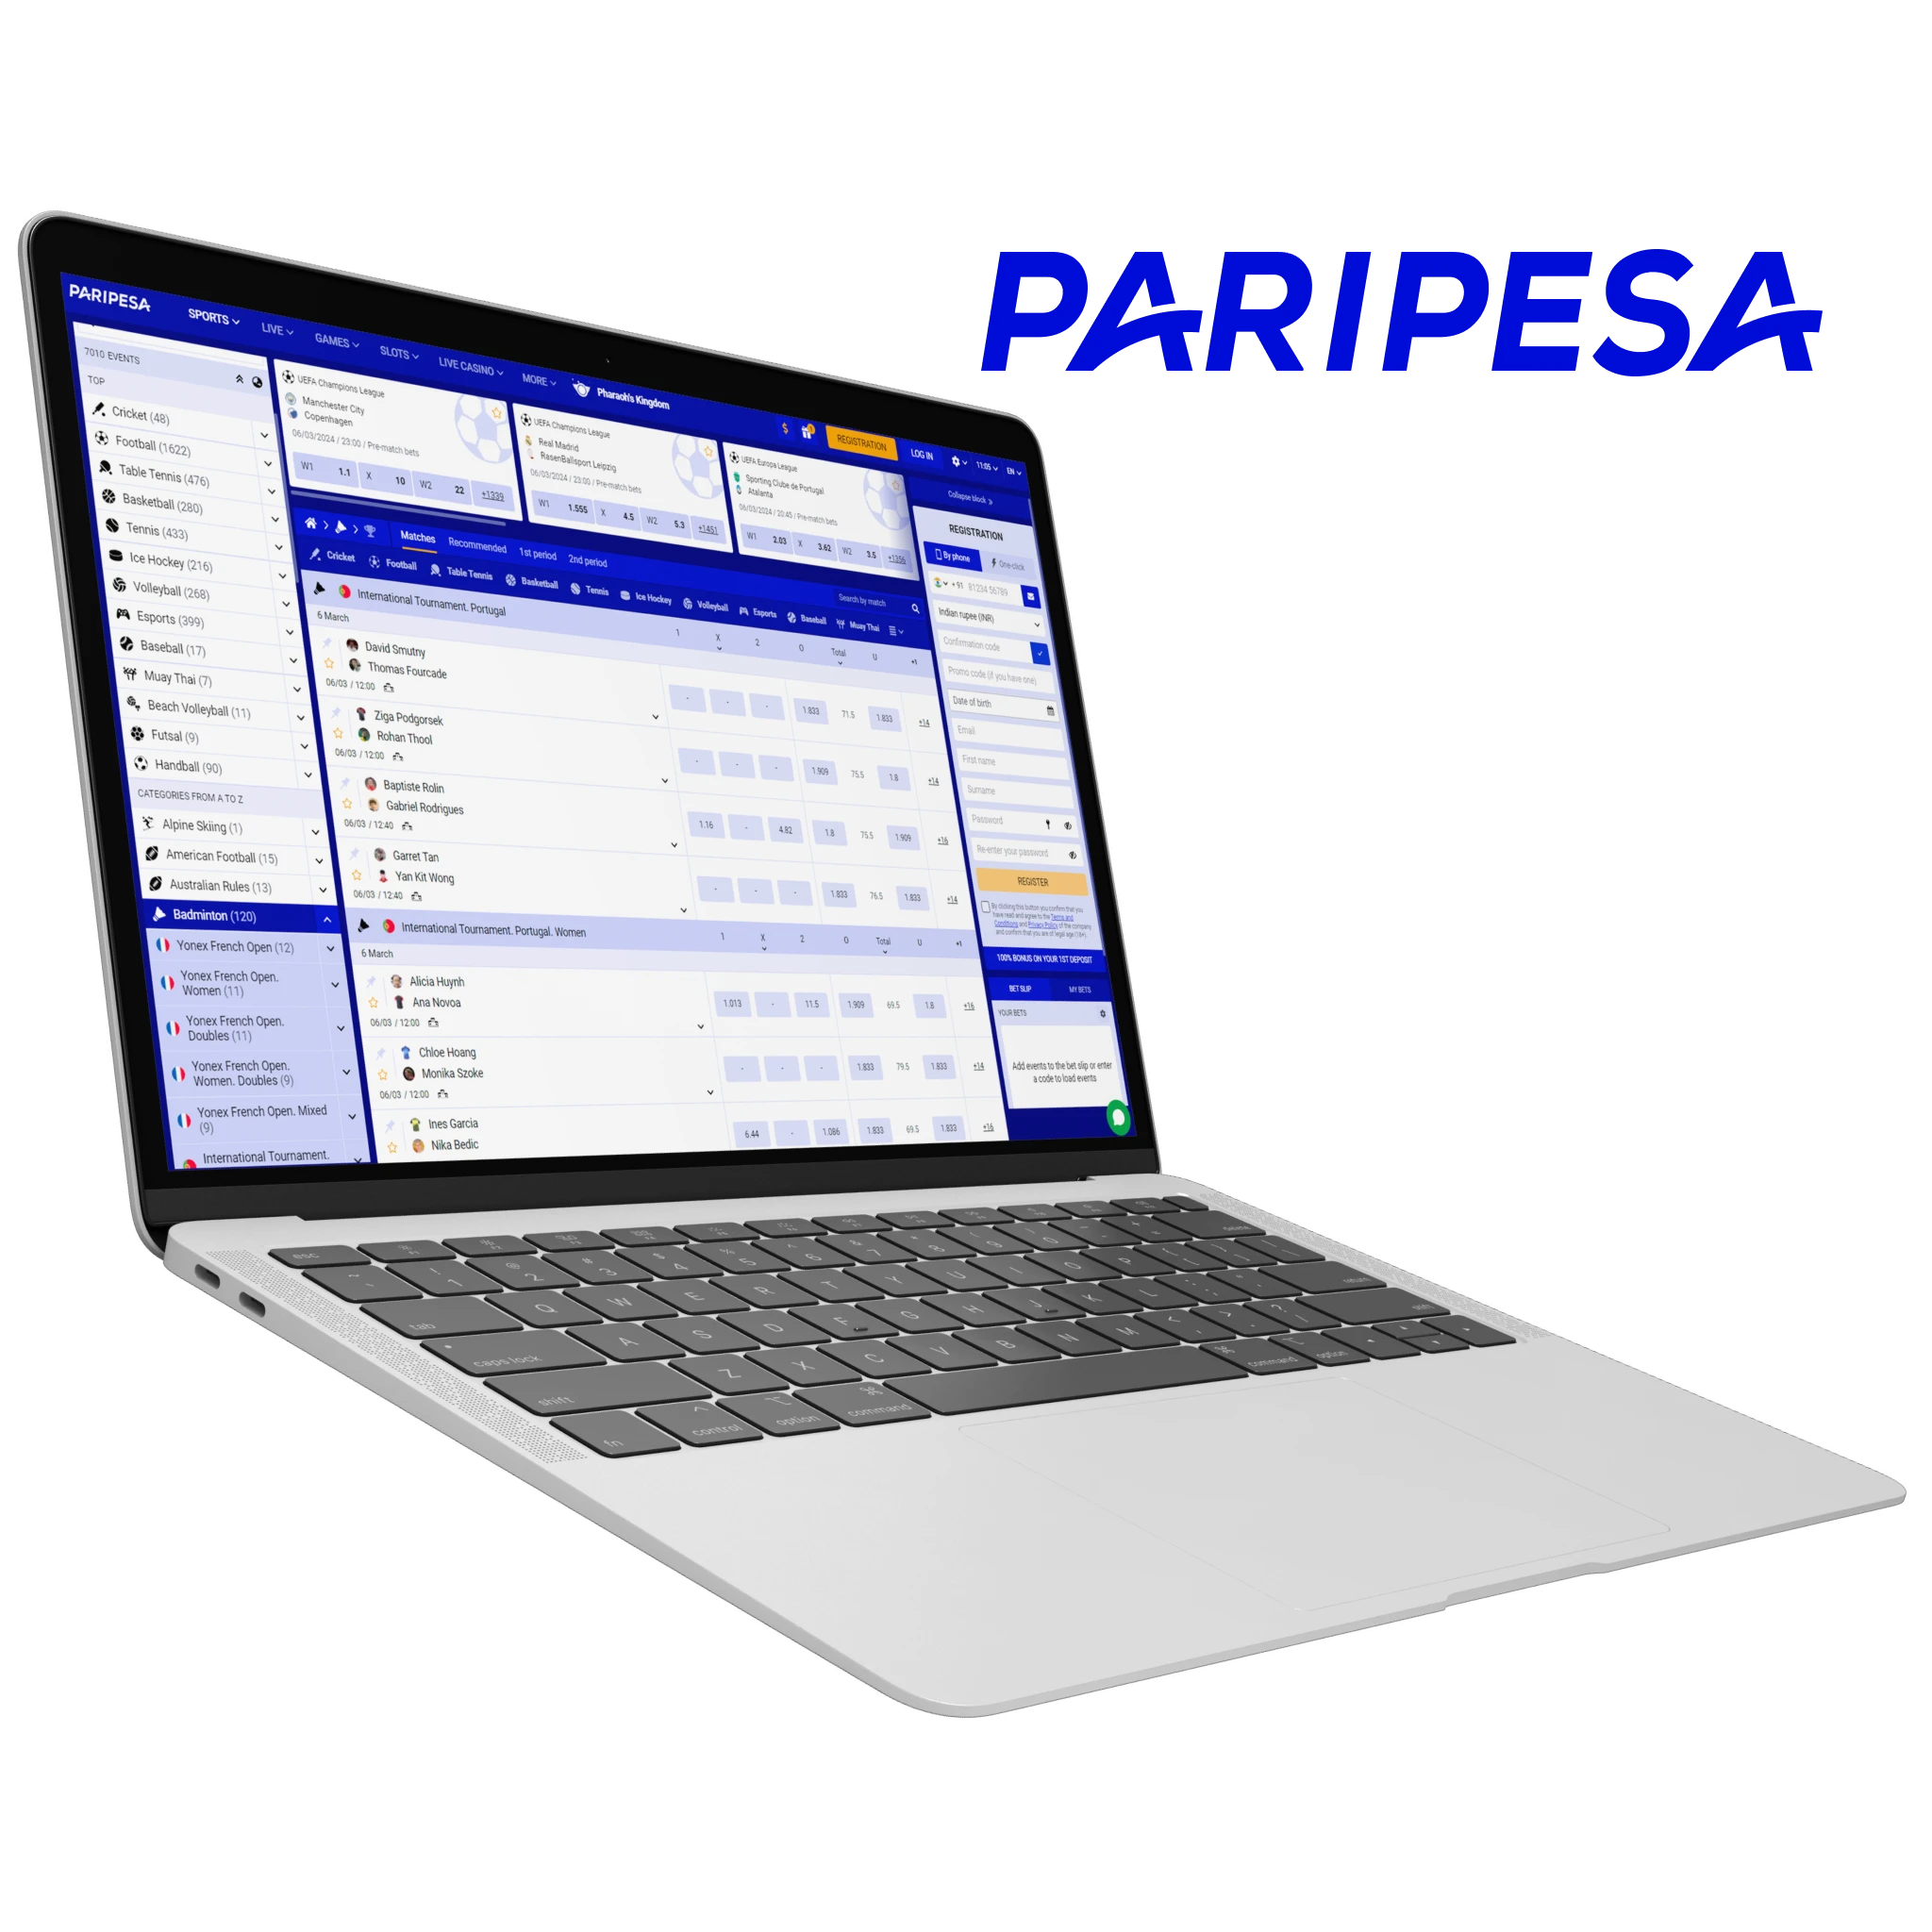 Exclusive bonuses and promotions for badminton betting await you at Paripesa.